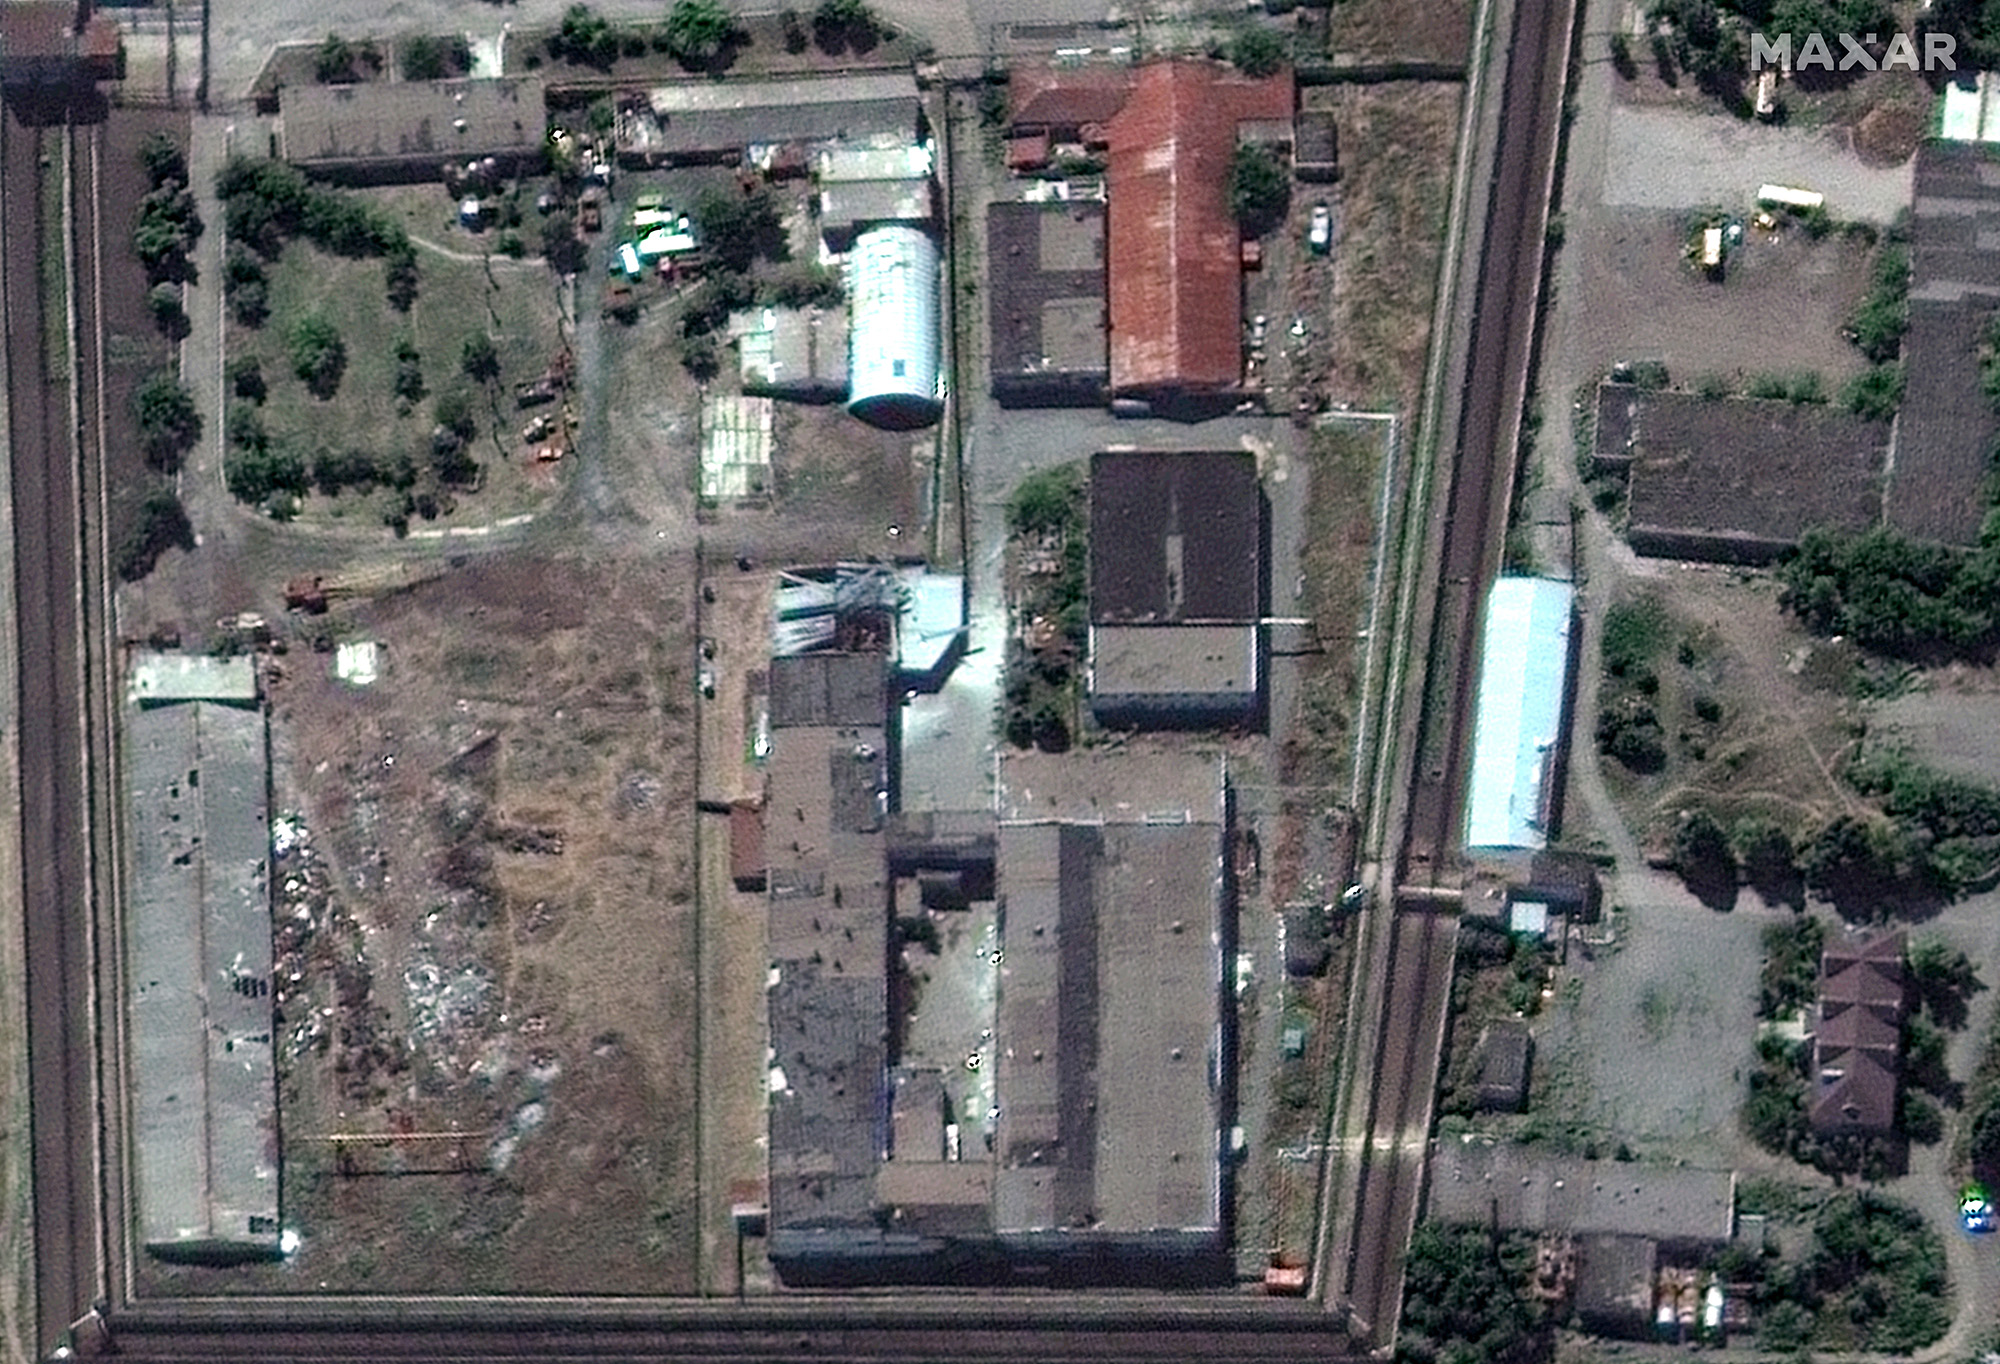 Olenivka prison in Donetsk seen in a satellite photo provided by Maxar Technologies on July 30, after the attack on the facility.